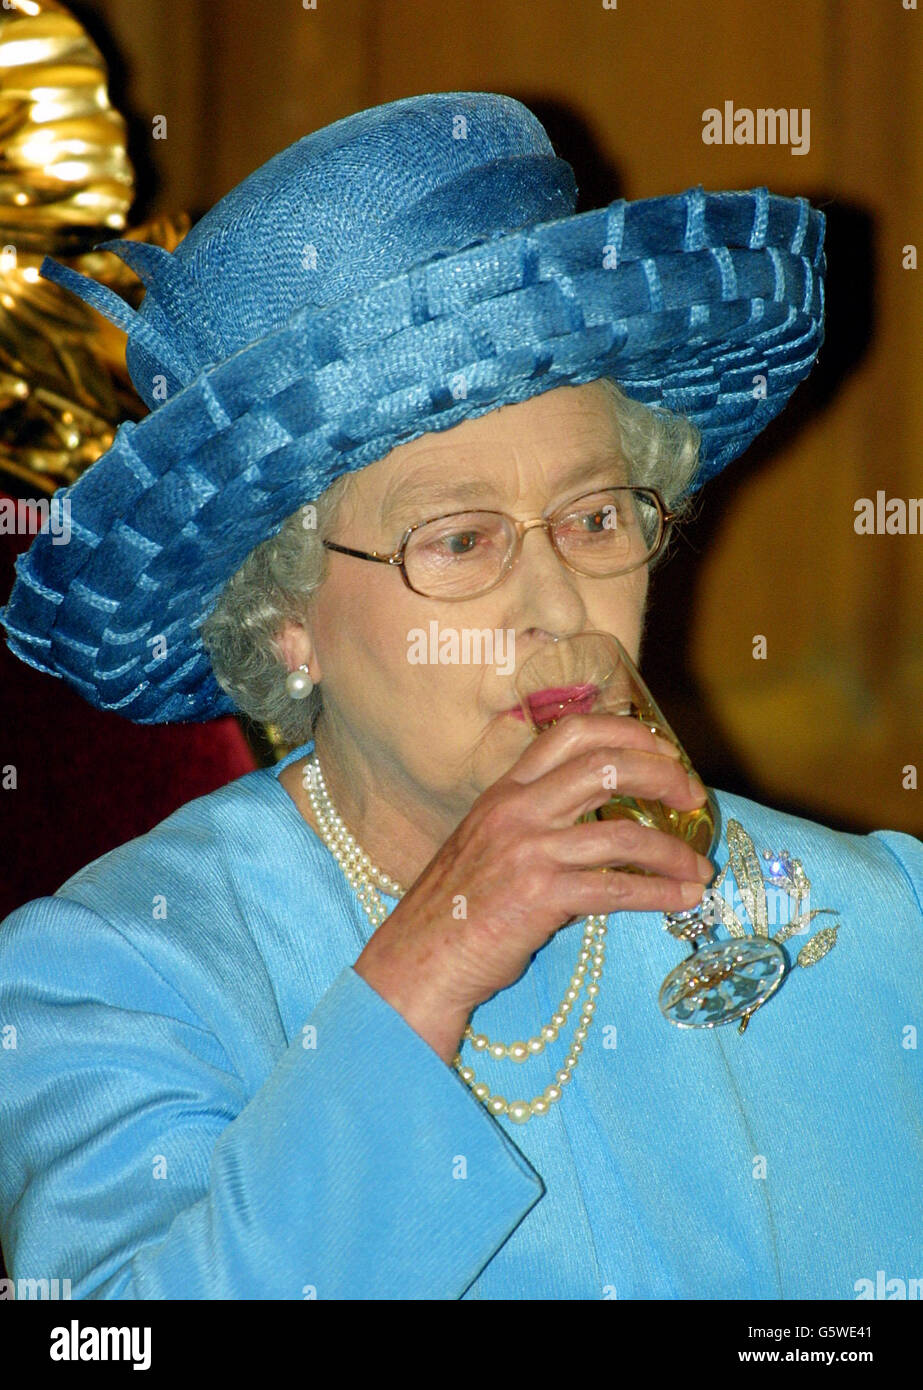 HRH the Queen raises her glass for a toast during a visiting the Guild hall in London where she will have lunch and make a speach along with the Lord Mayor and the Prime Minister Tony Blair as a continuing part of the the Queen's Golden jubilee celebrations. Stock Photo